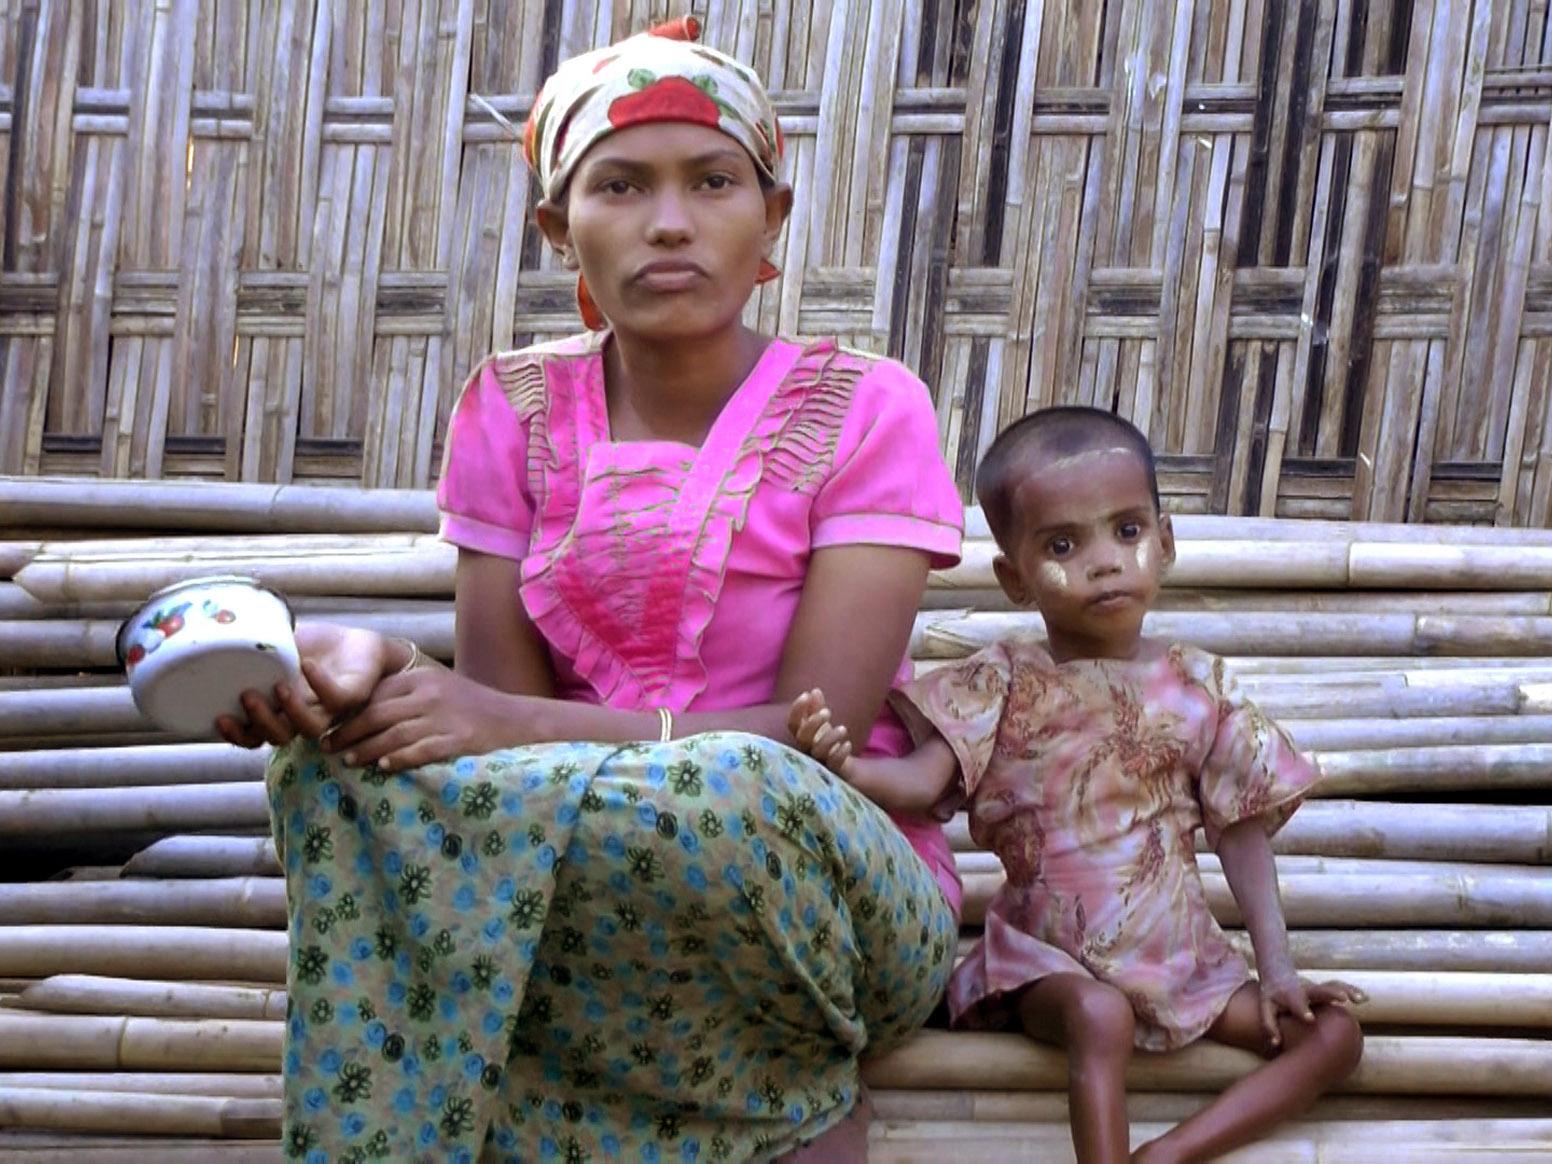 Rosmaida Bibi, who suffers from severe malnutrition, sits with her 20-year-old mother Hamida Begum outside their makeshift shelter at the Dar Paing camp north of Sittwe in Rakhine, Burma